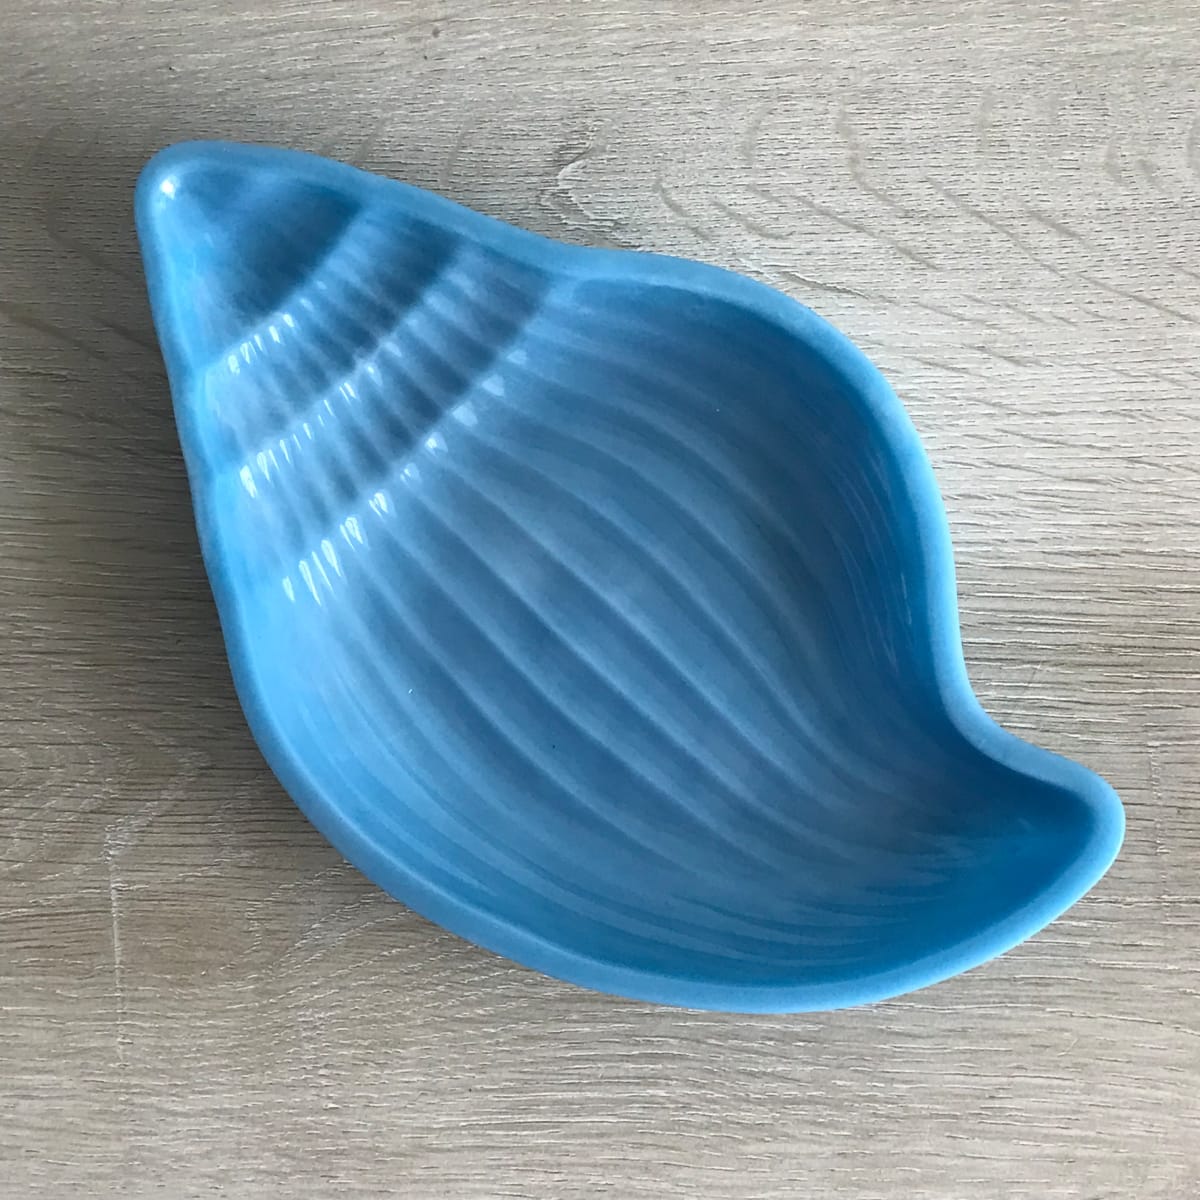 Large Tulip Shell Tray - GLOcean by Colorvine by Kelsey 